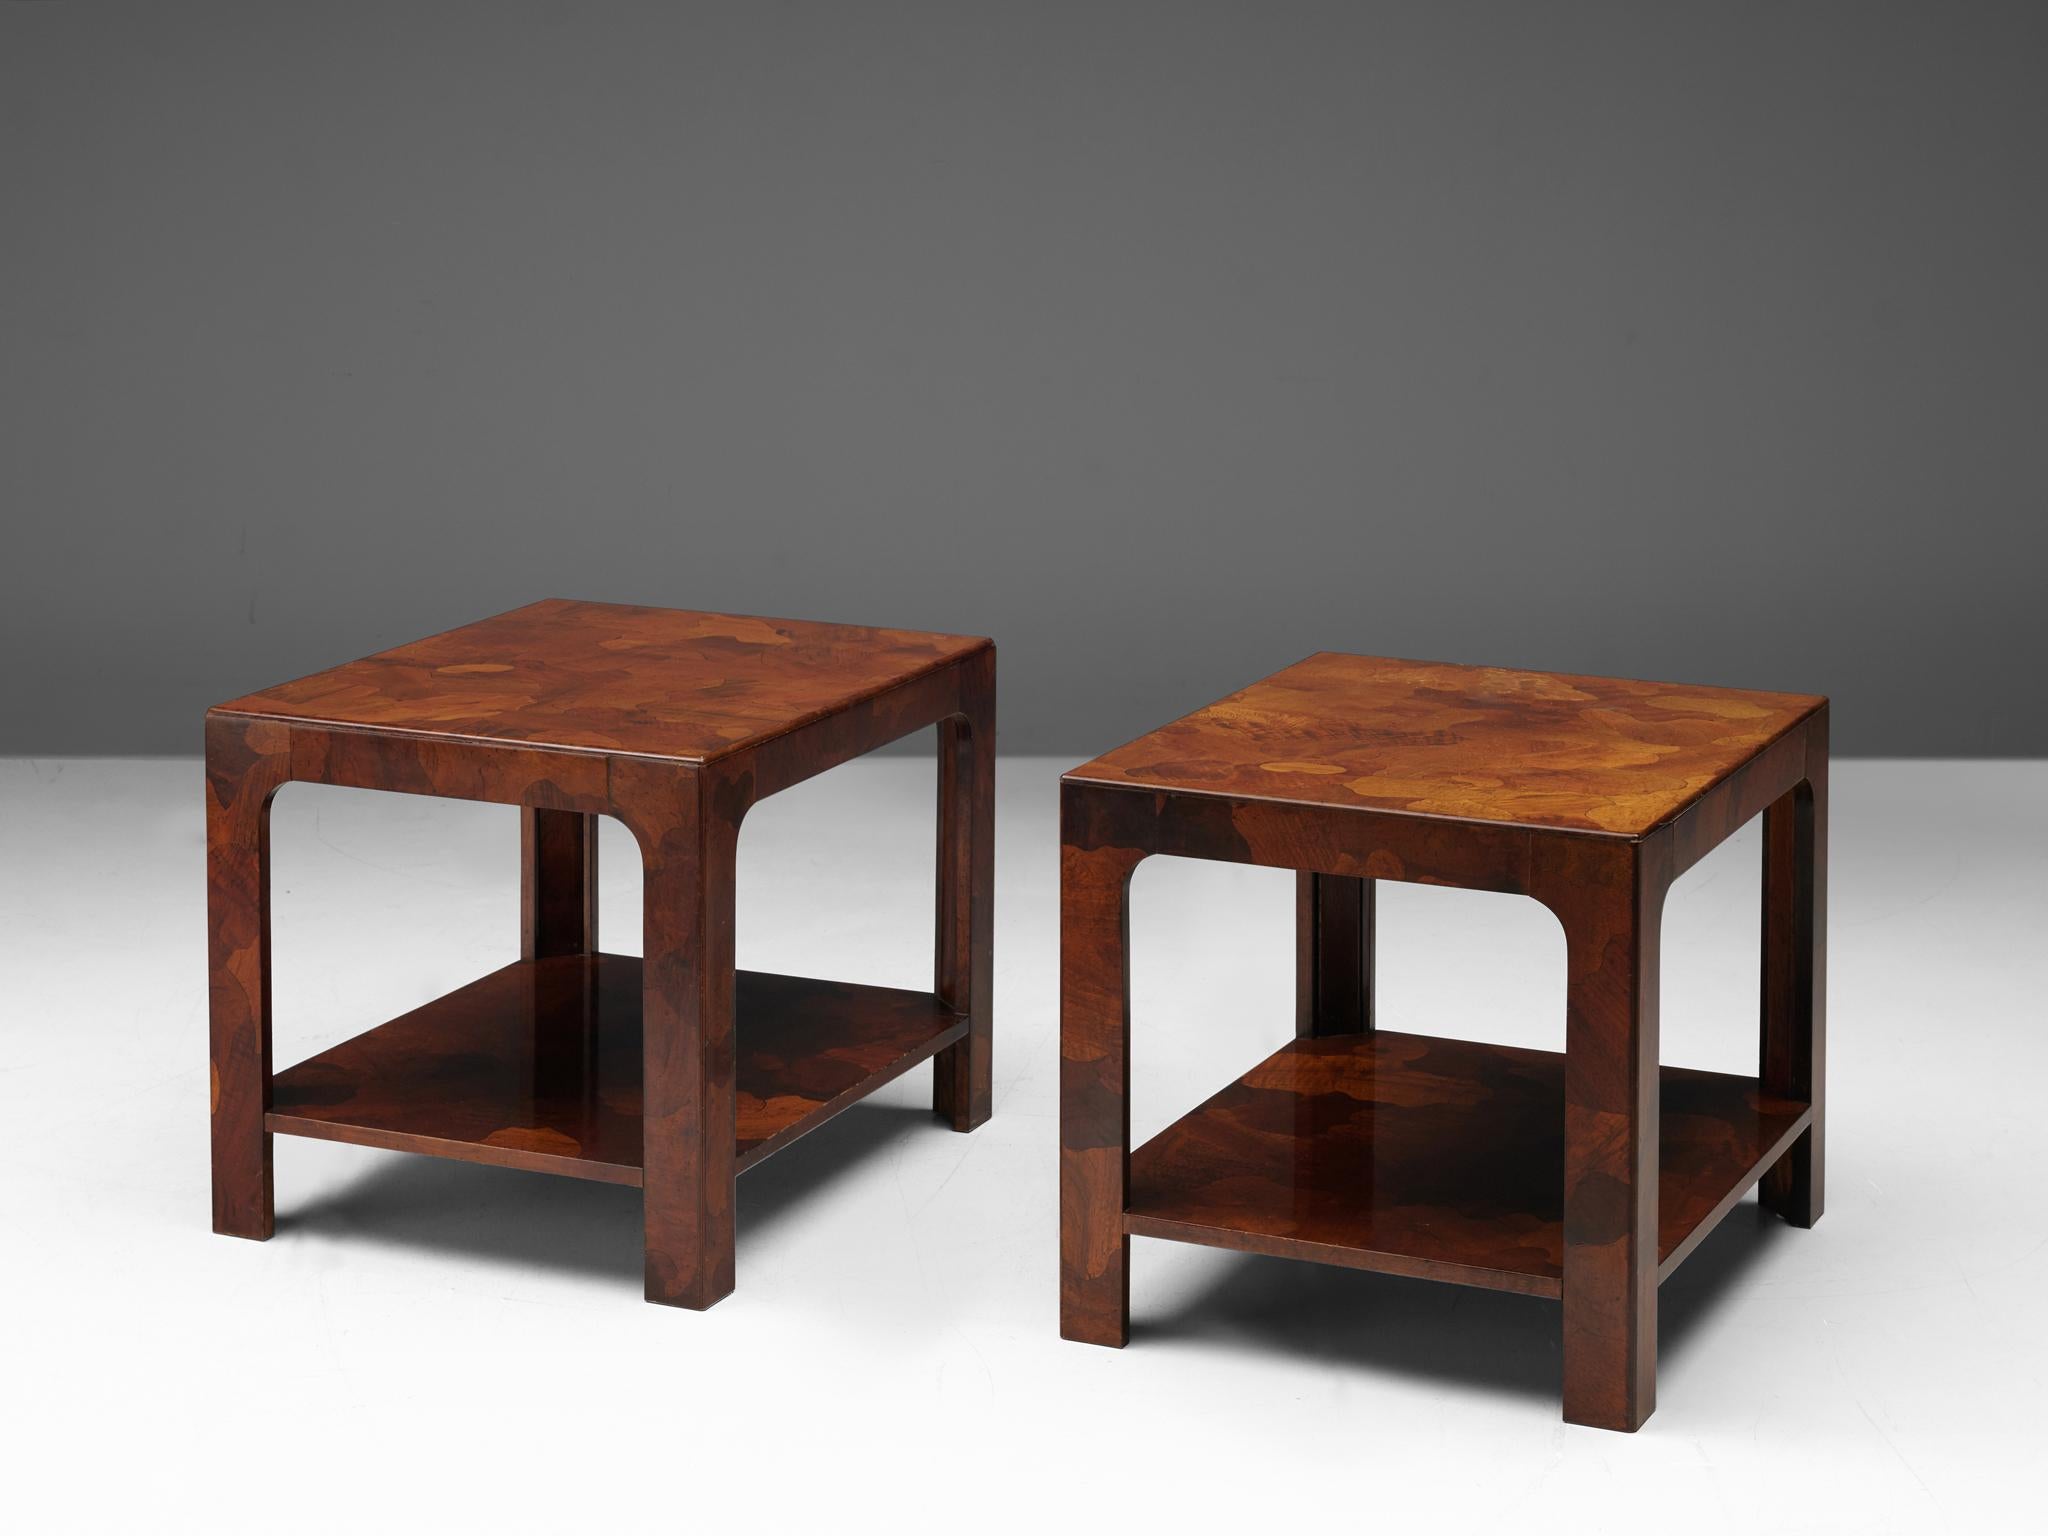 Pair of side tables, American walnut, United States, 1960s

Well designed rectangular coffee tables inlayed with organic shaped pieces of American Walnut that show a variety of tones. The coffee tables are executed with two rectangulars on top of